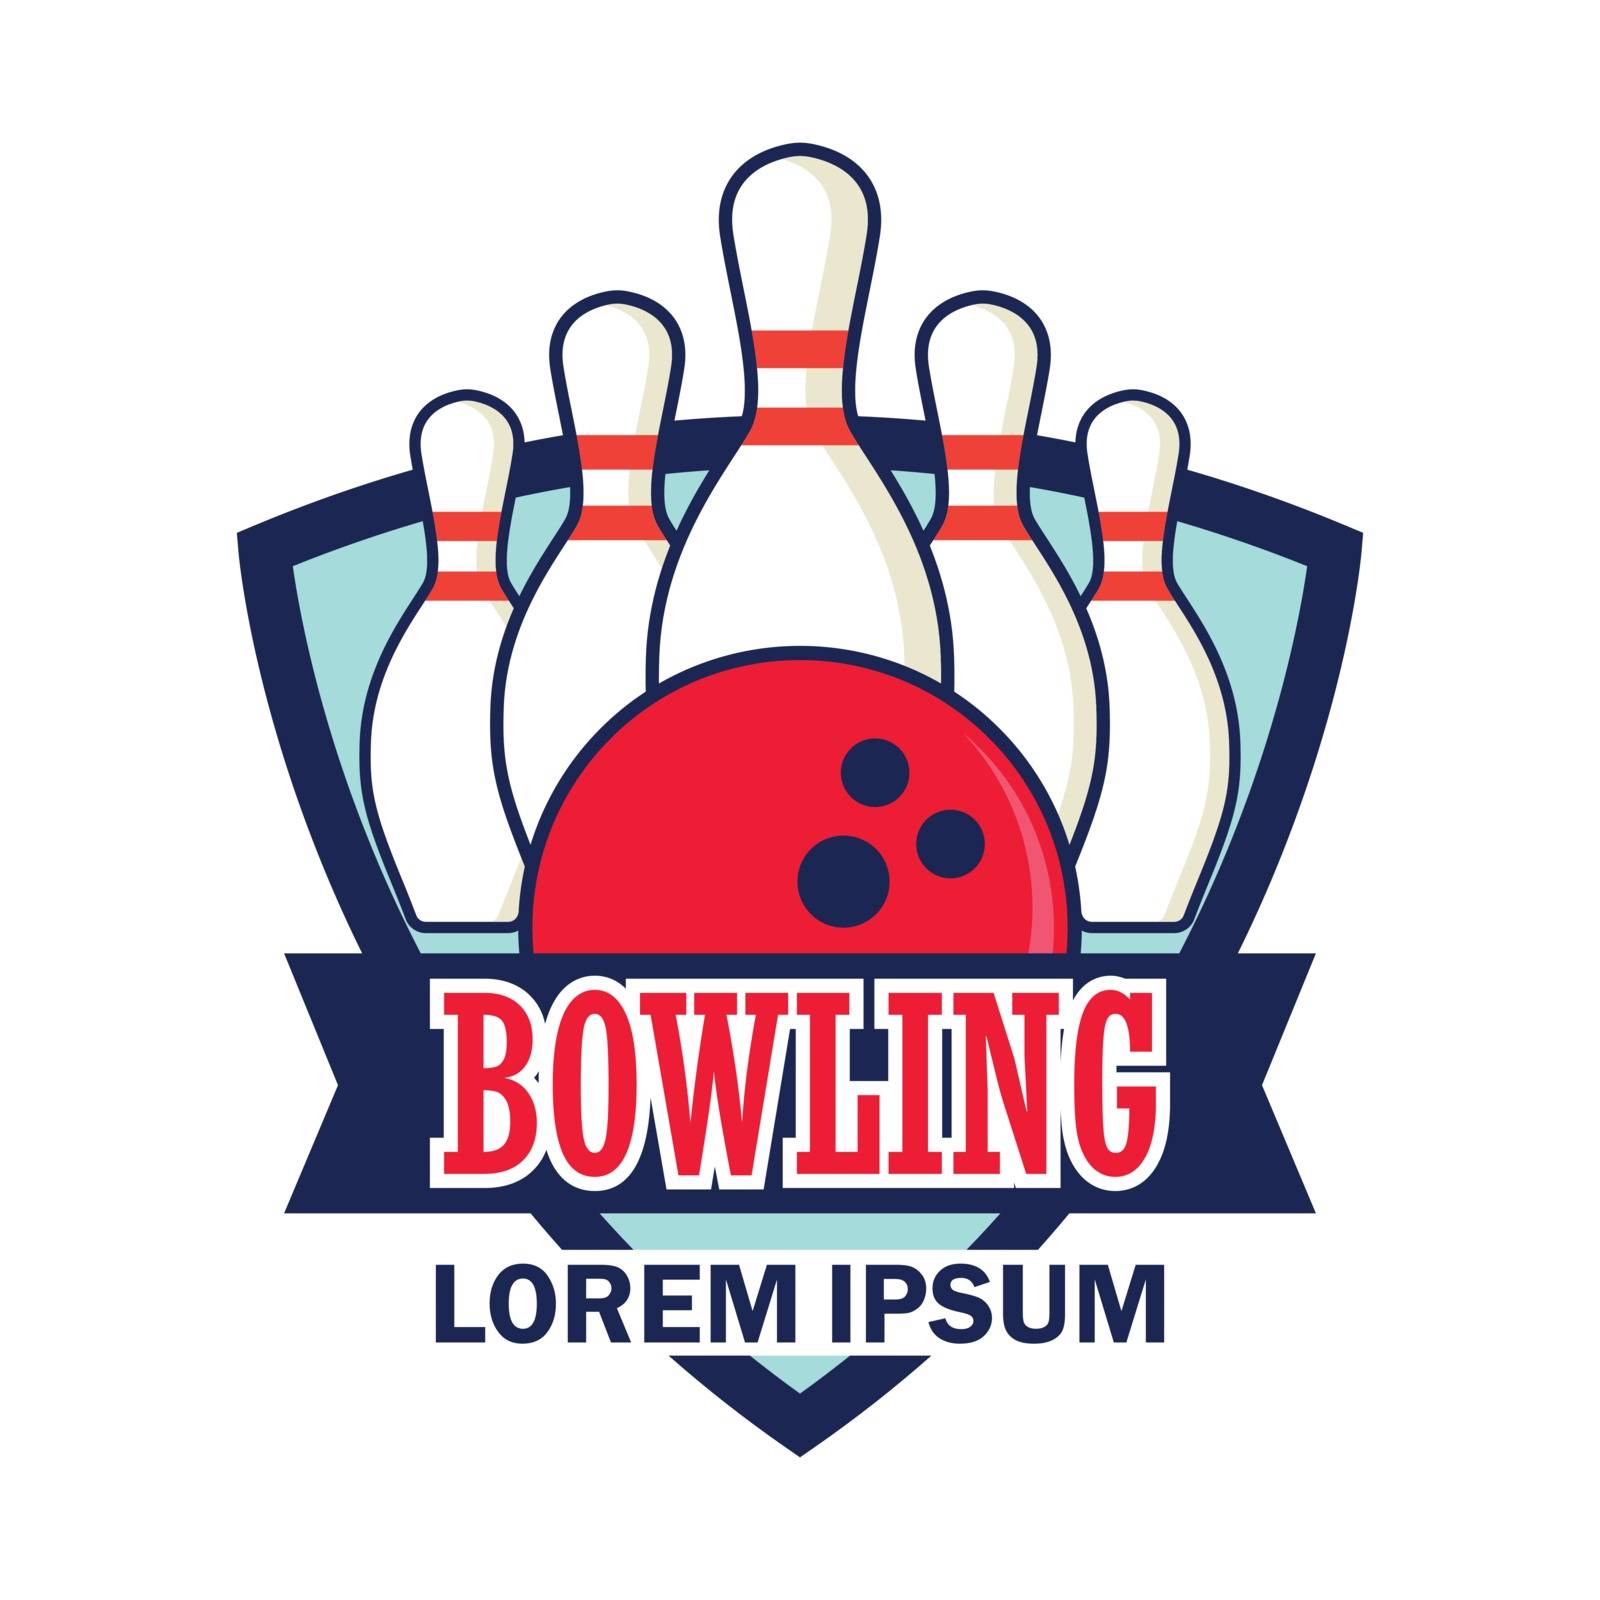 bowling icon with text space for your slogan / tag line, vector illustration by SevenCircles